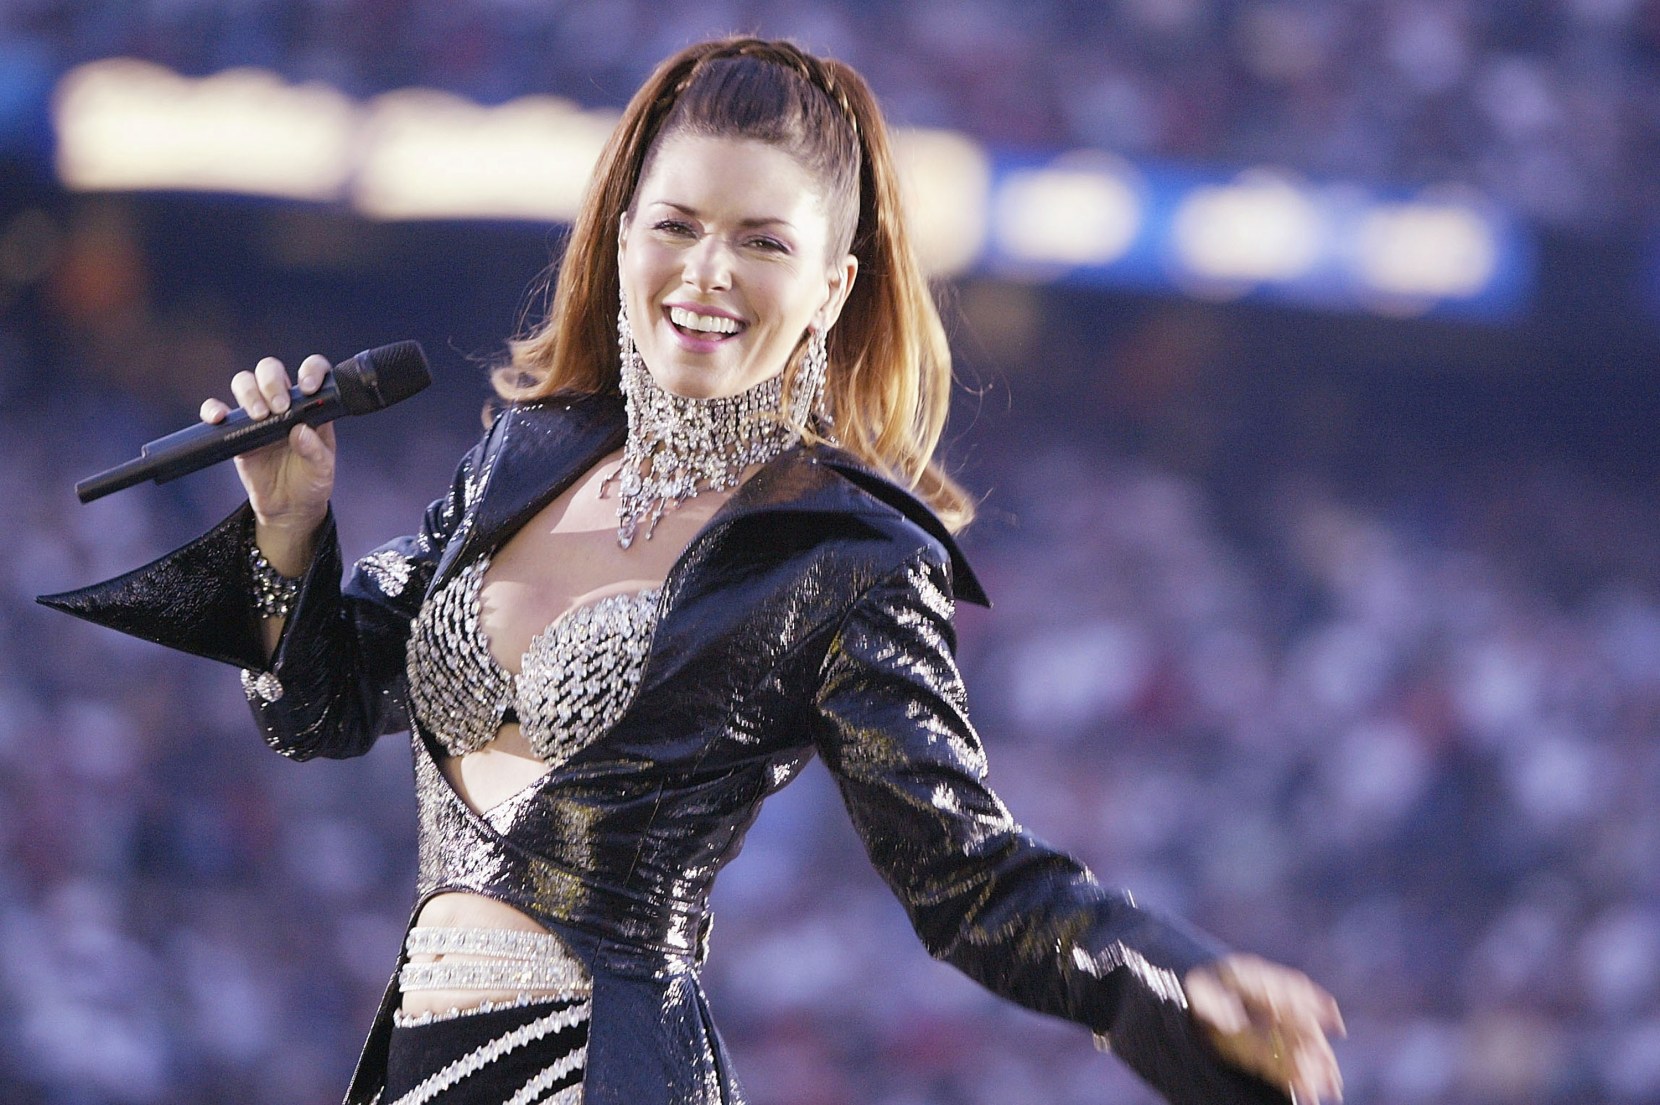 Shania Twain 'Wants to Go Out With a Bang' on Her Farewell Tour